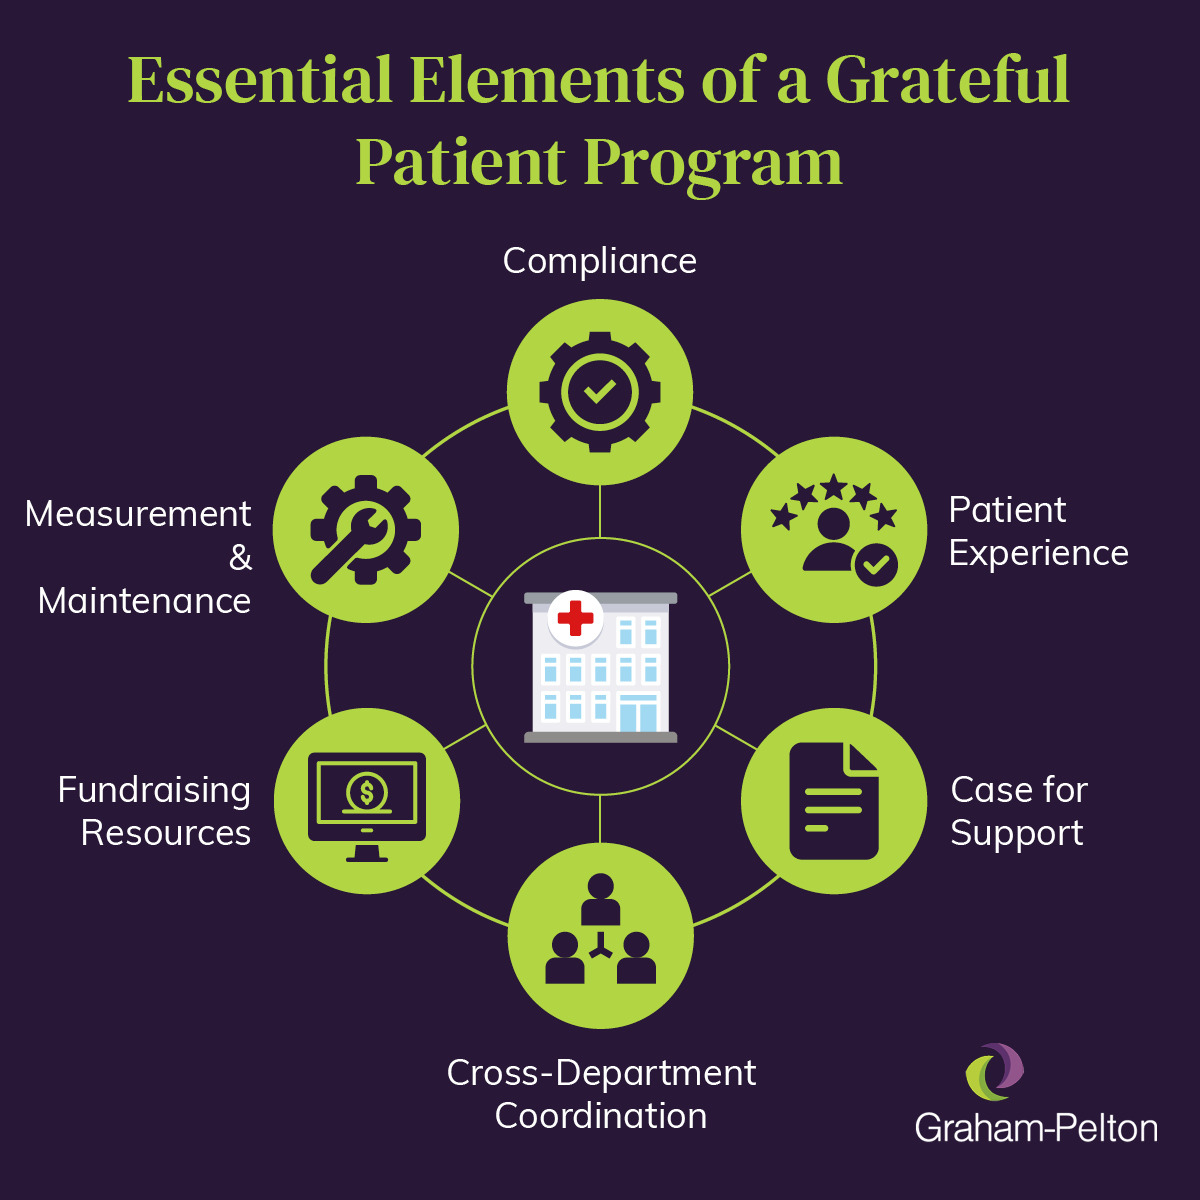 This graphic lists the essential elements of a grateful patient program, detailed in the text below.